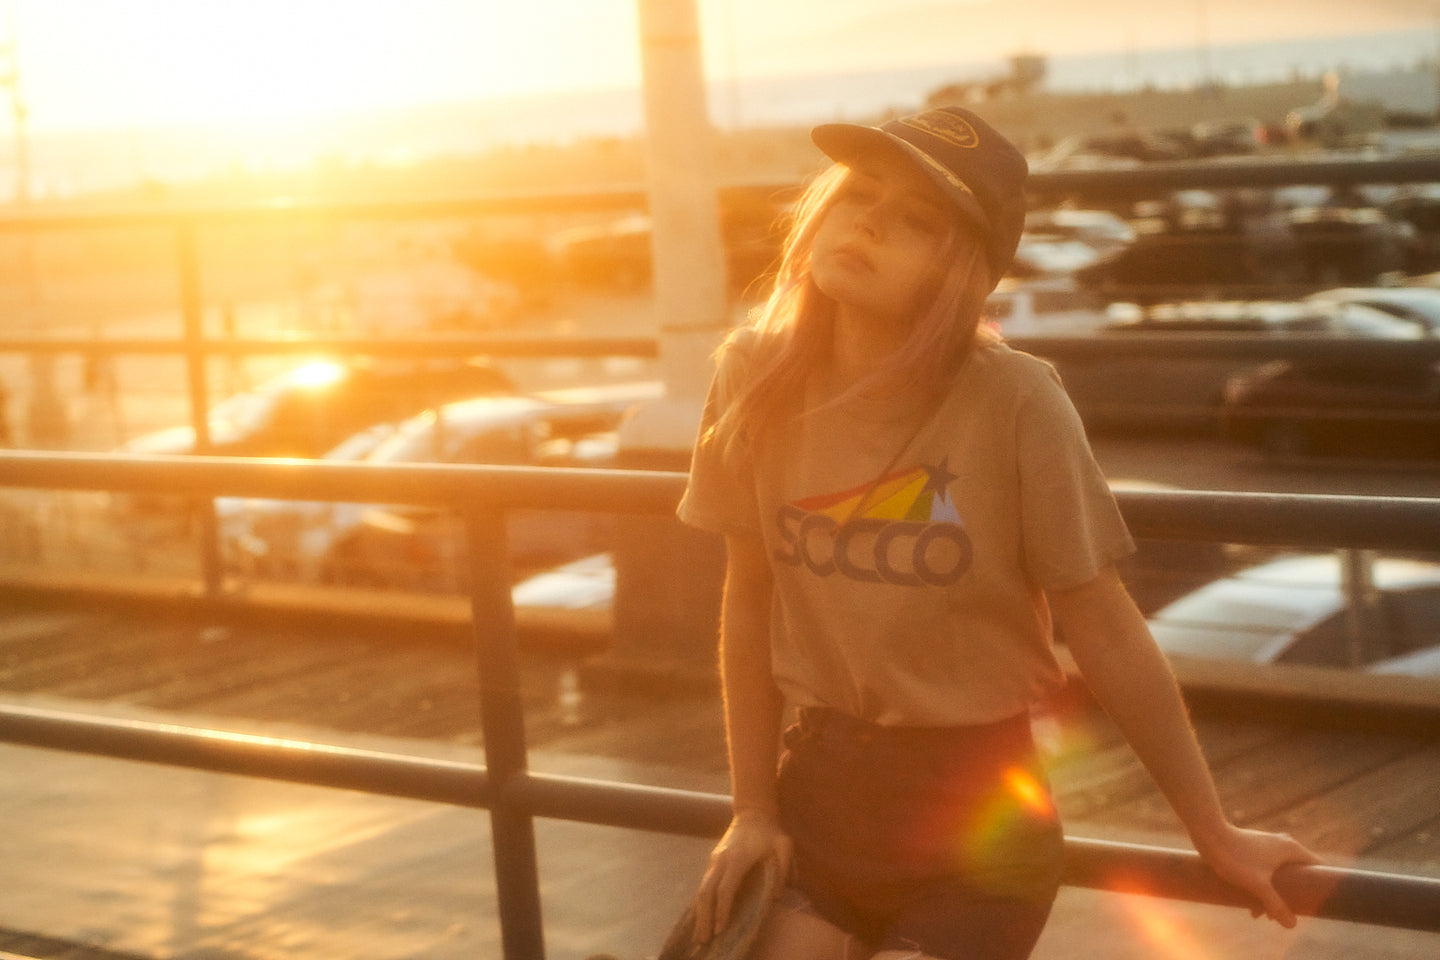 Female wearing a SOCCO t-shirt and shorts with a skateboard at sunset on a boardwalk in Los Angeles.